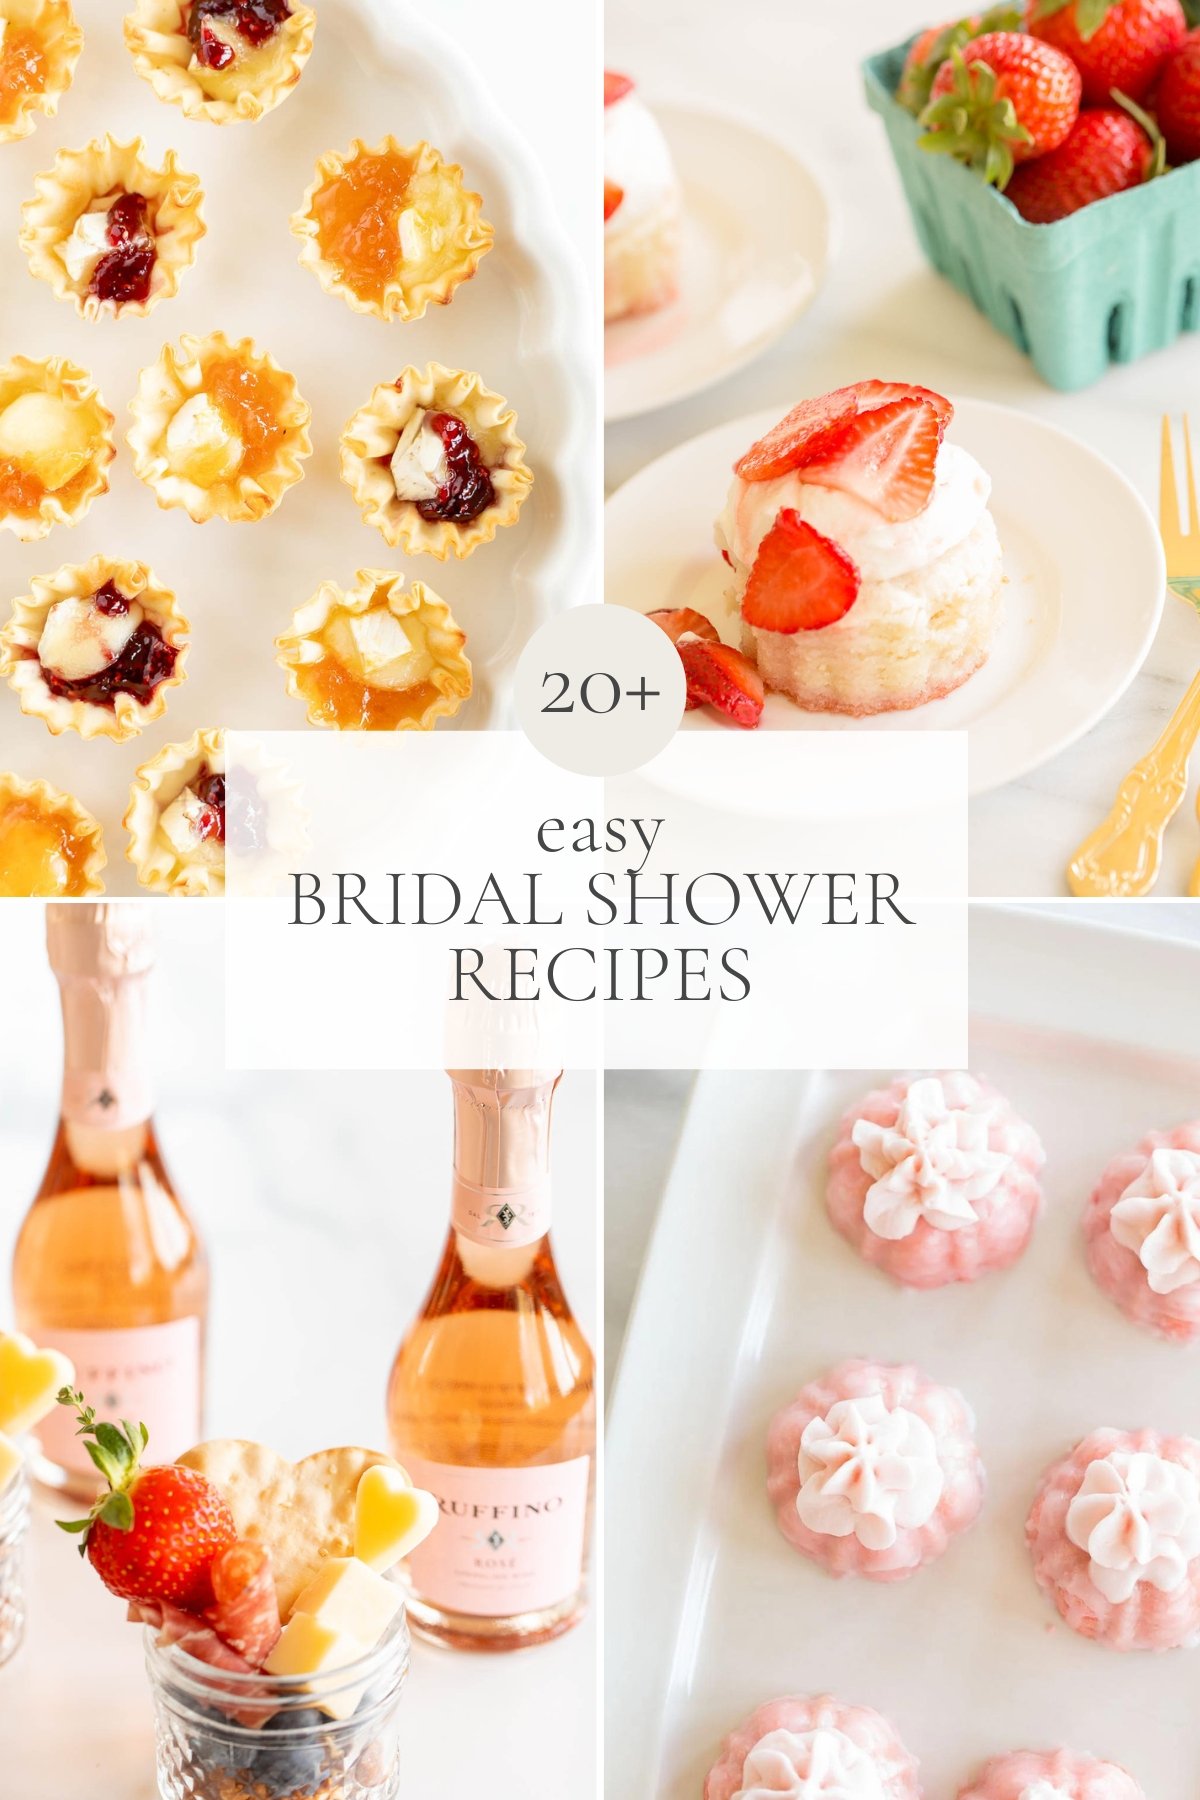 A graphic image that is a compilation of wedding shower recipes. Headline across the center reads "20+ easy Bridal Shower Recipes"